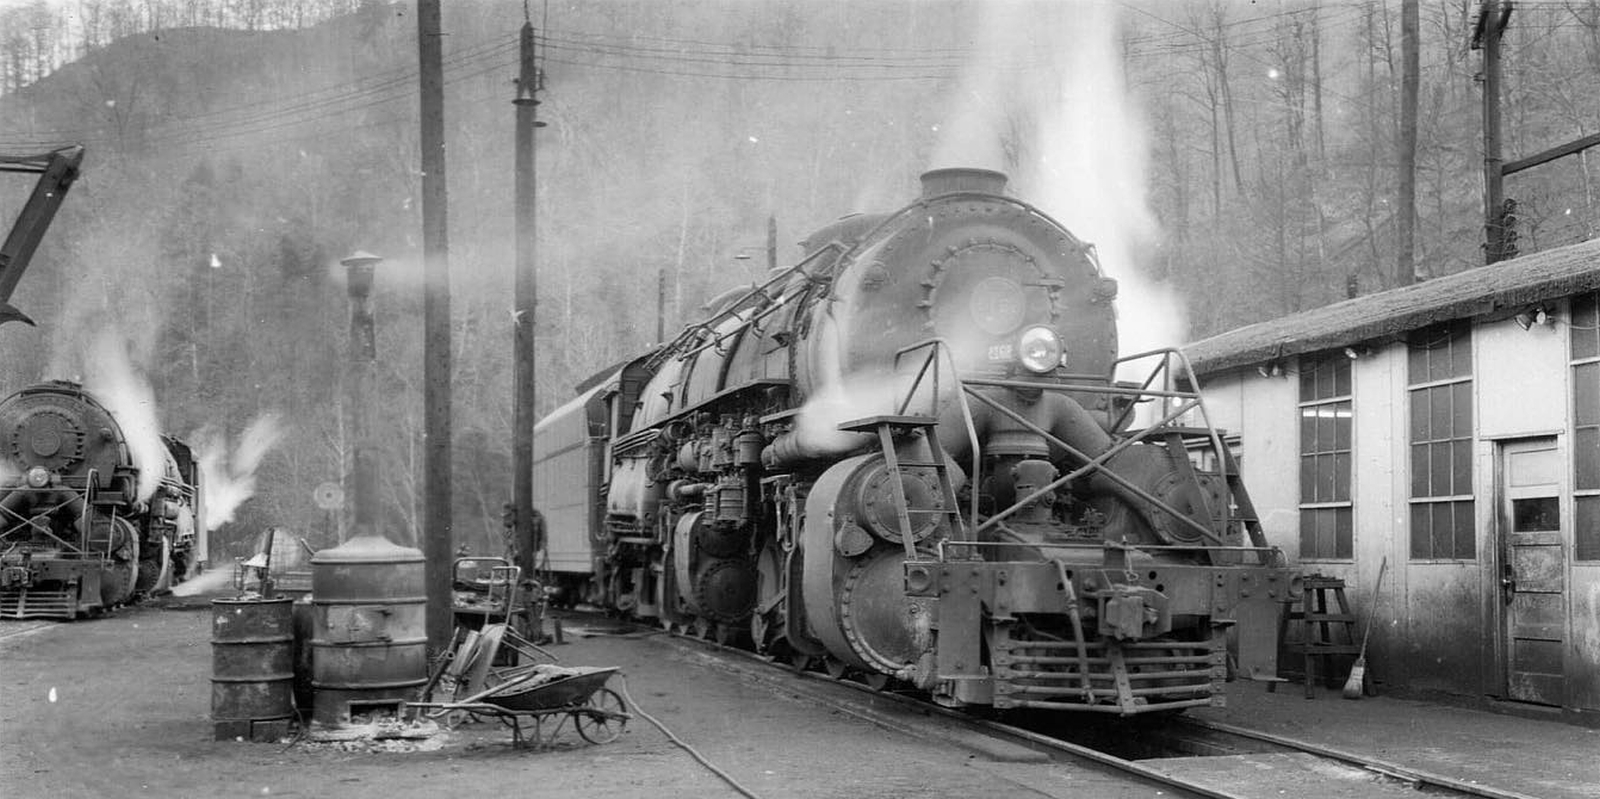 Y6a no. 2162 (front) and Y6b no. 2200 (rear) in January 1958 at Grundy, Virginia